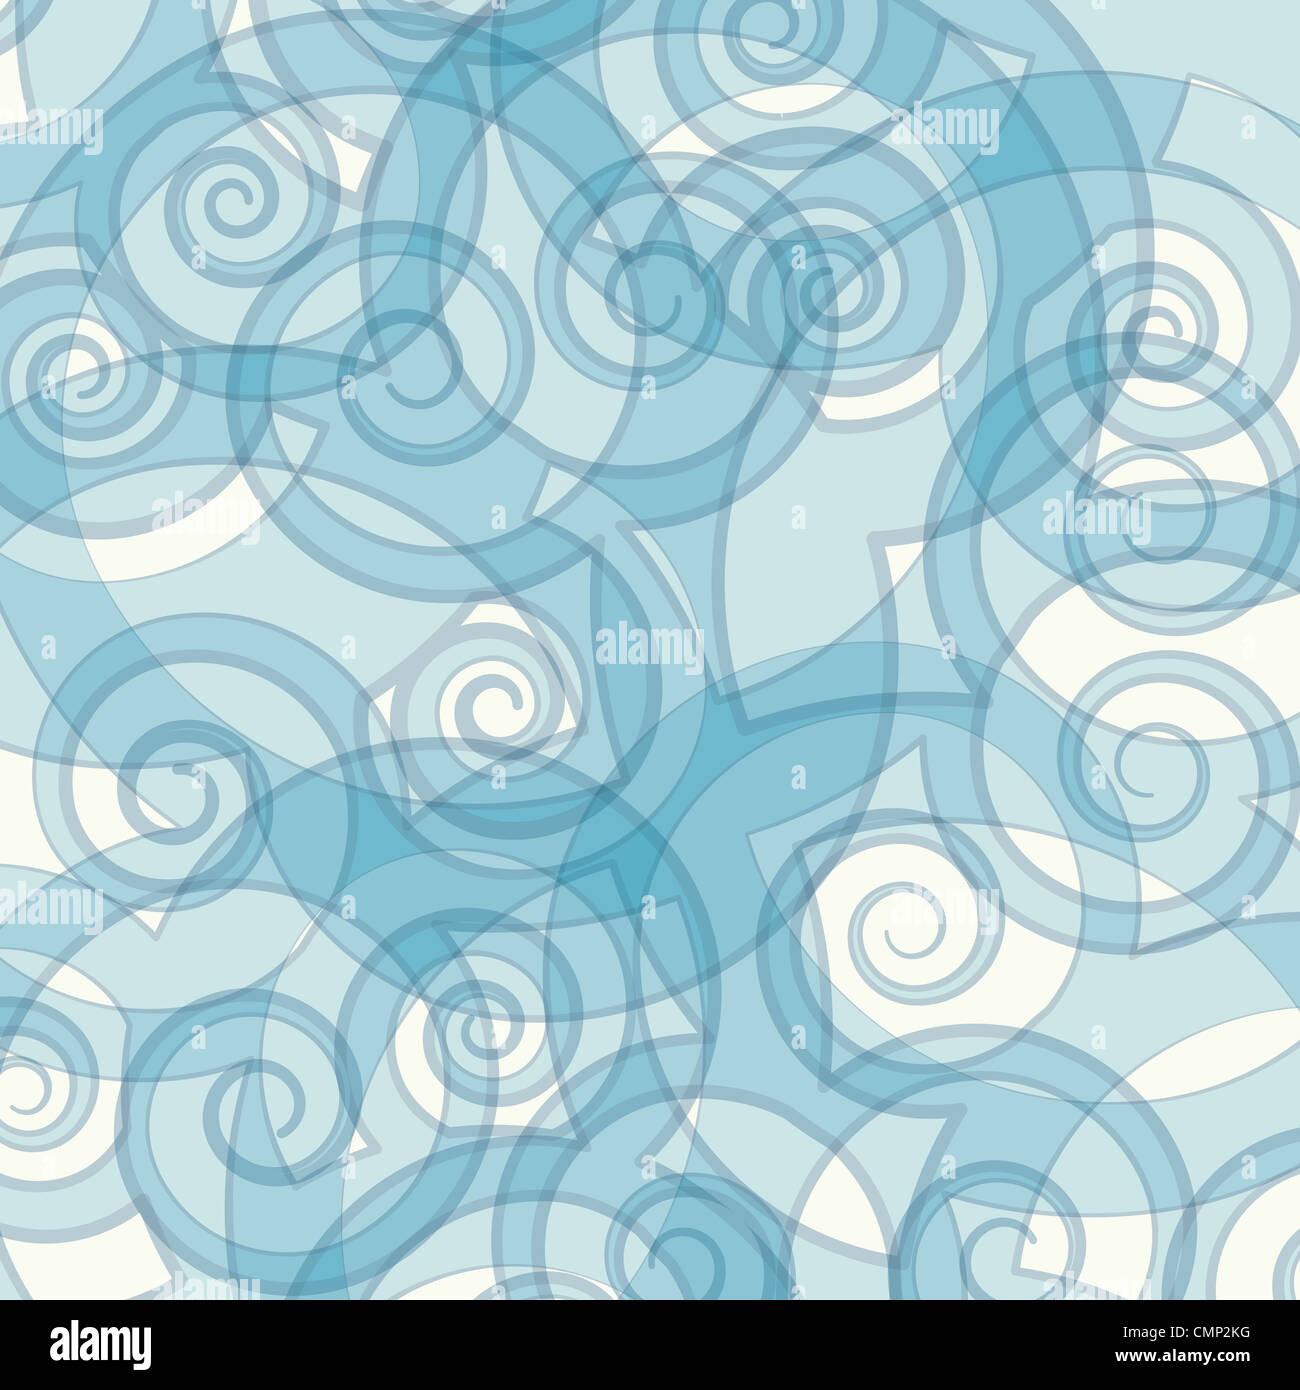 Abstract blue color swirly background illustration. Stock Photo